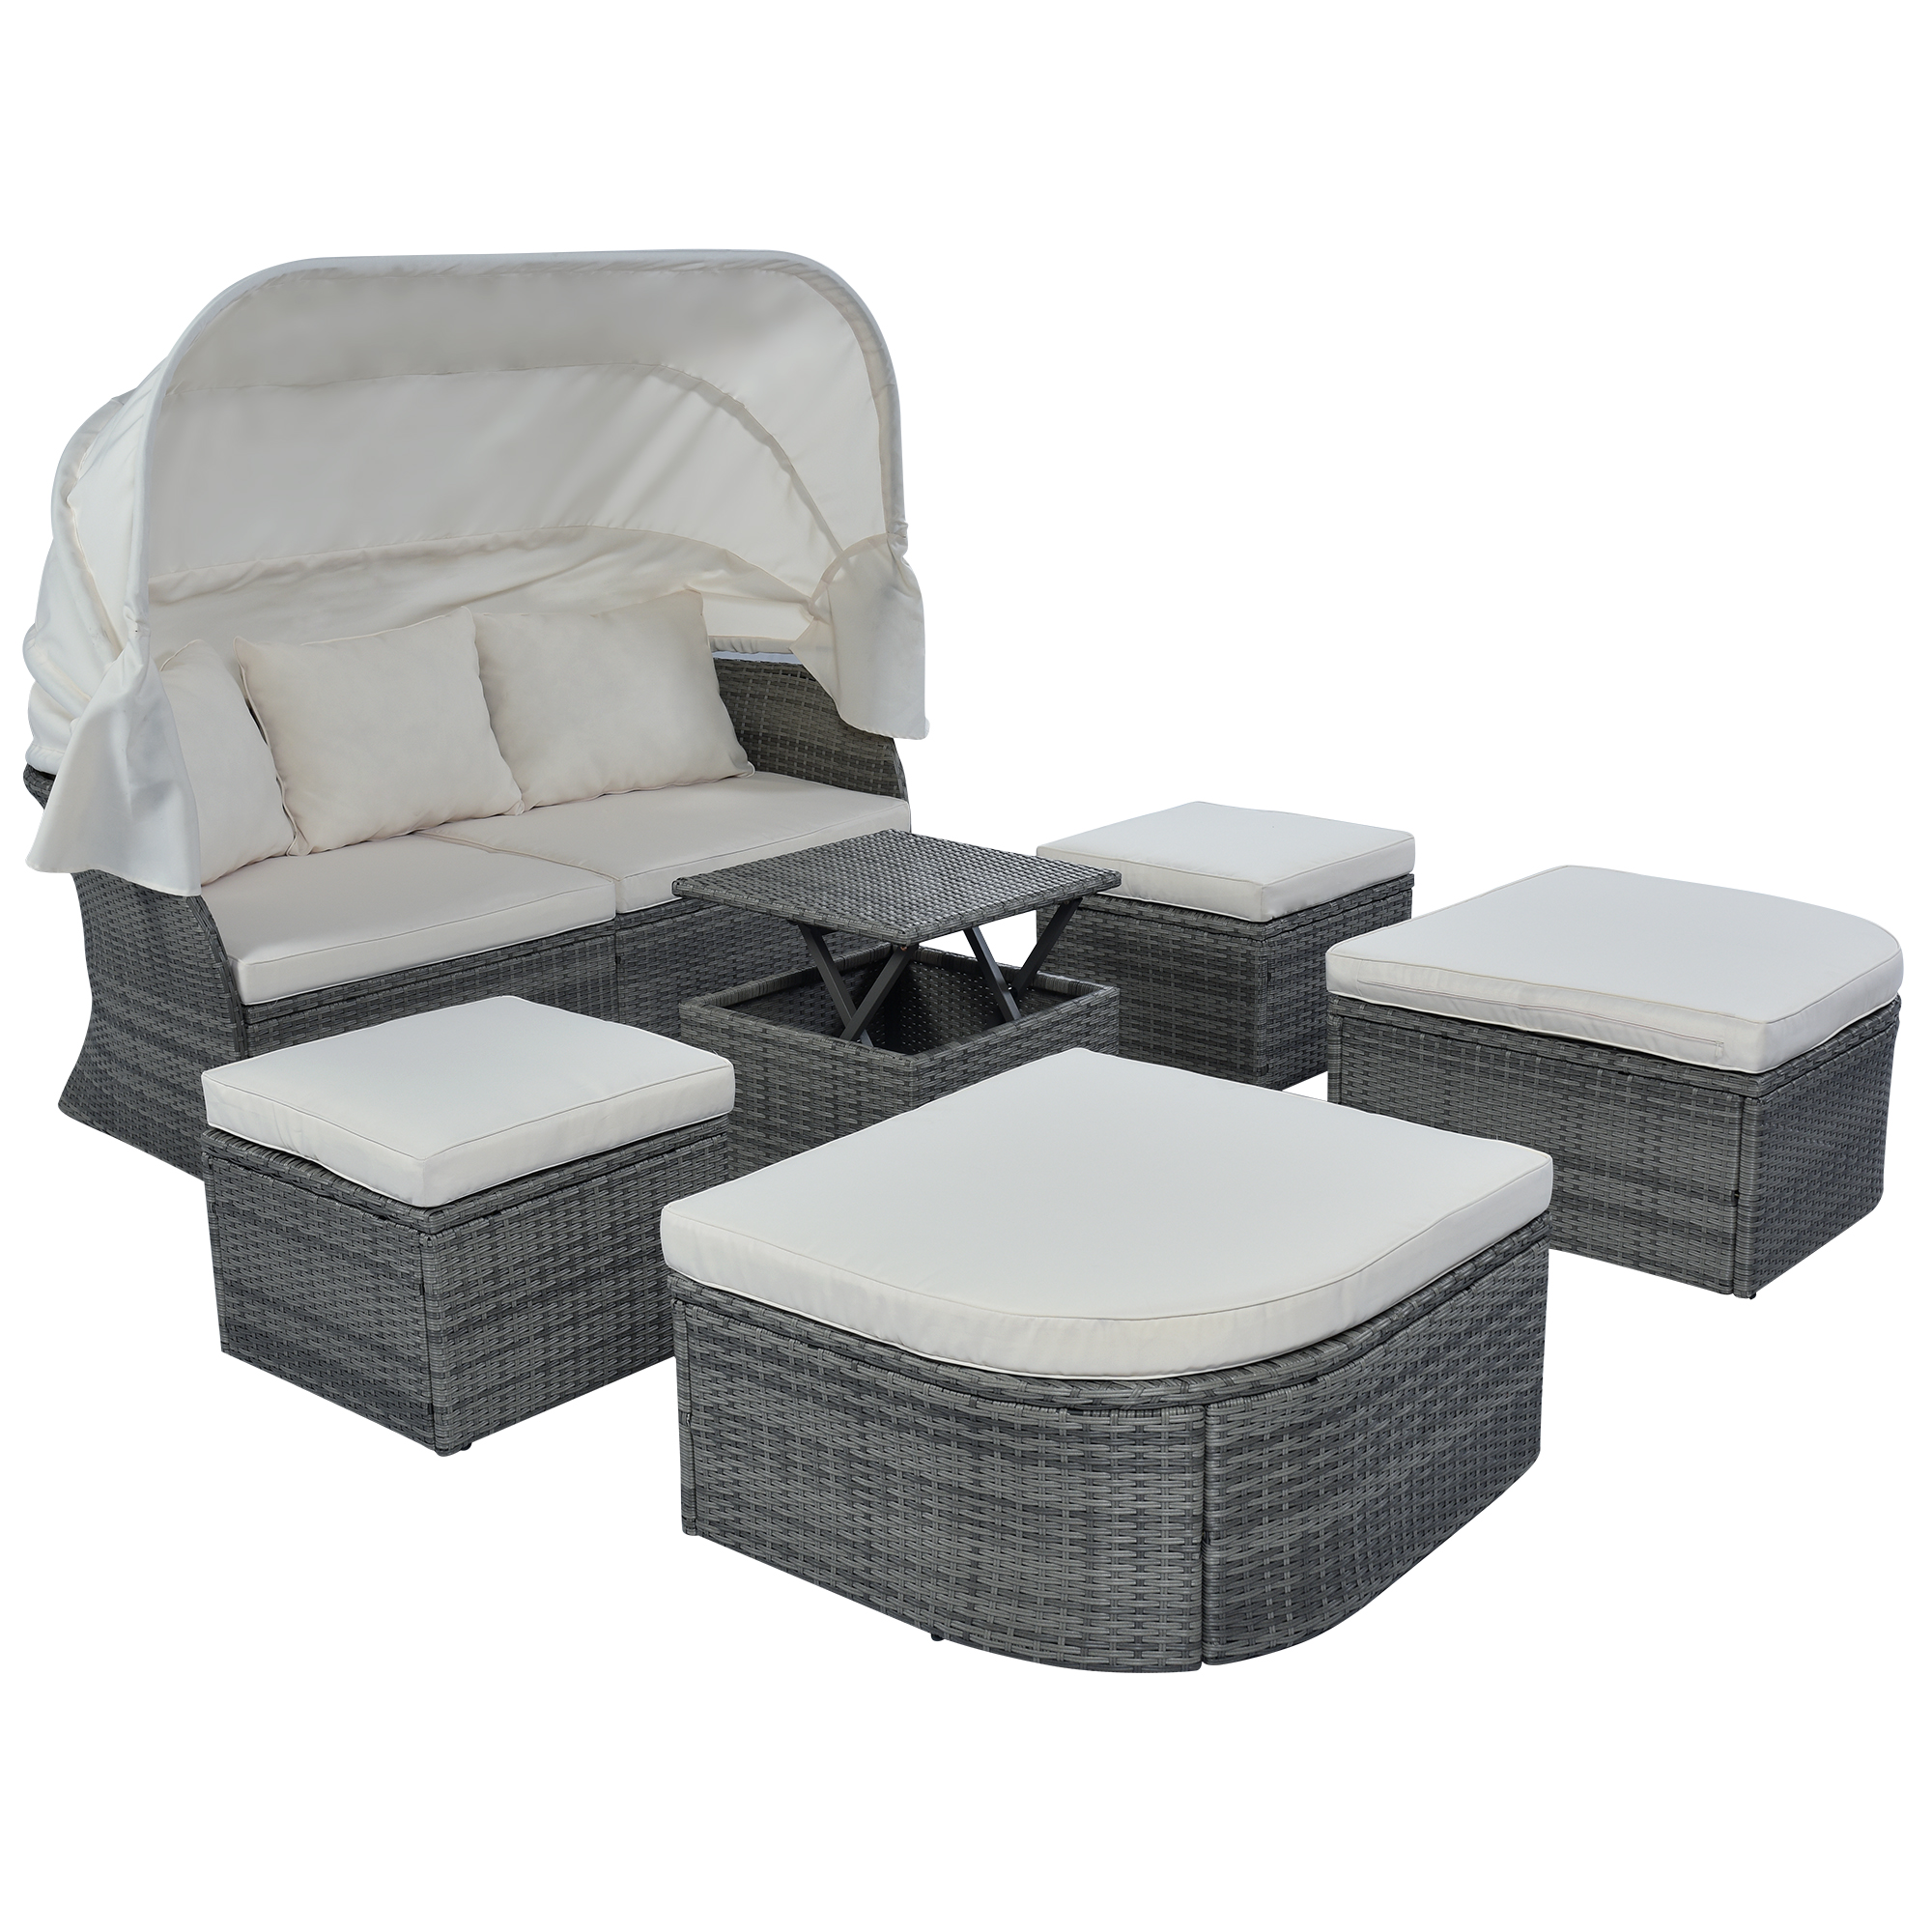  Outdoor Patio Furniture Set Daybed Sunbed with Retractable Canopy Conversation Set Wicker Furniture Sofa Set-CASAINC